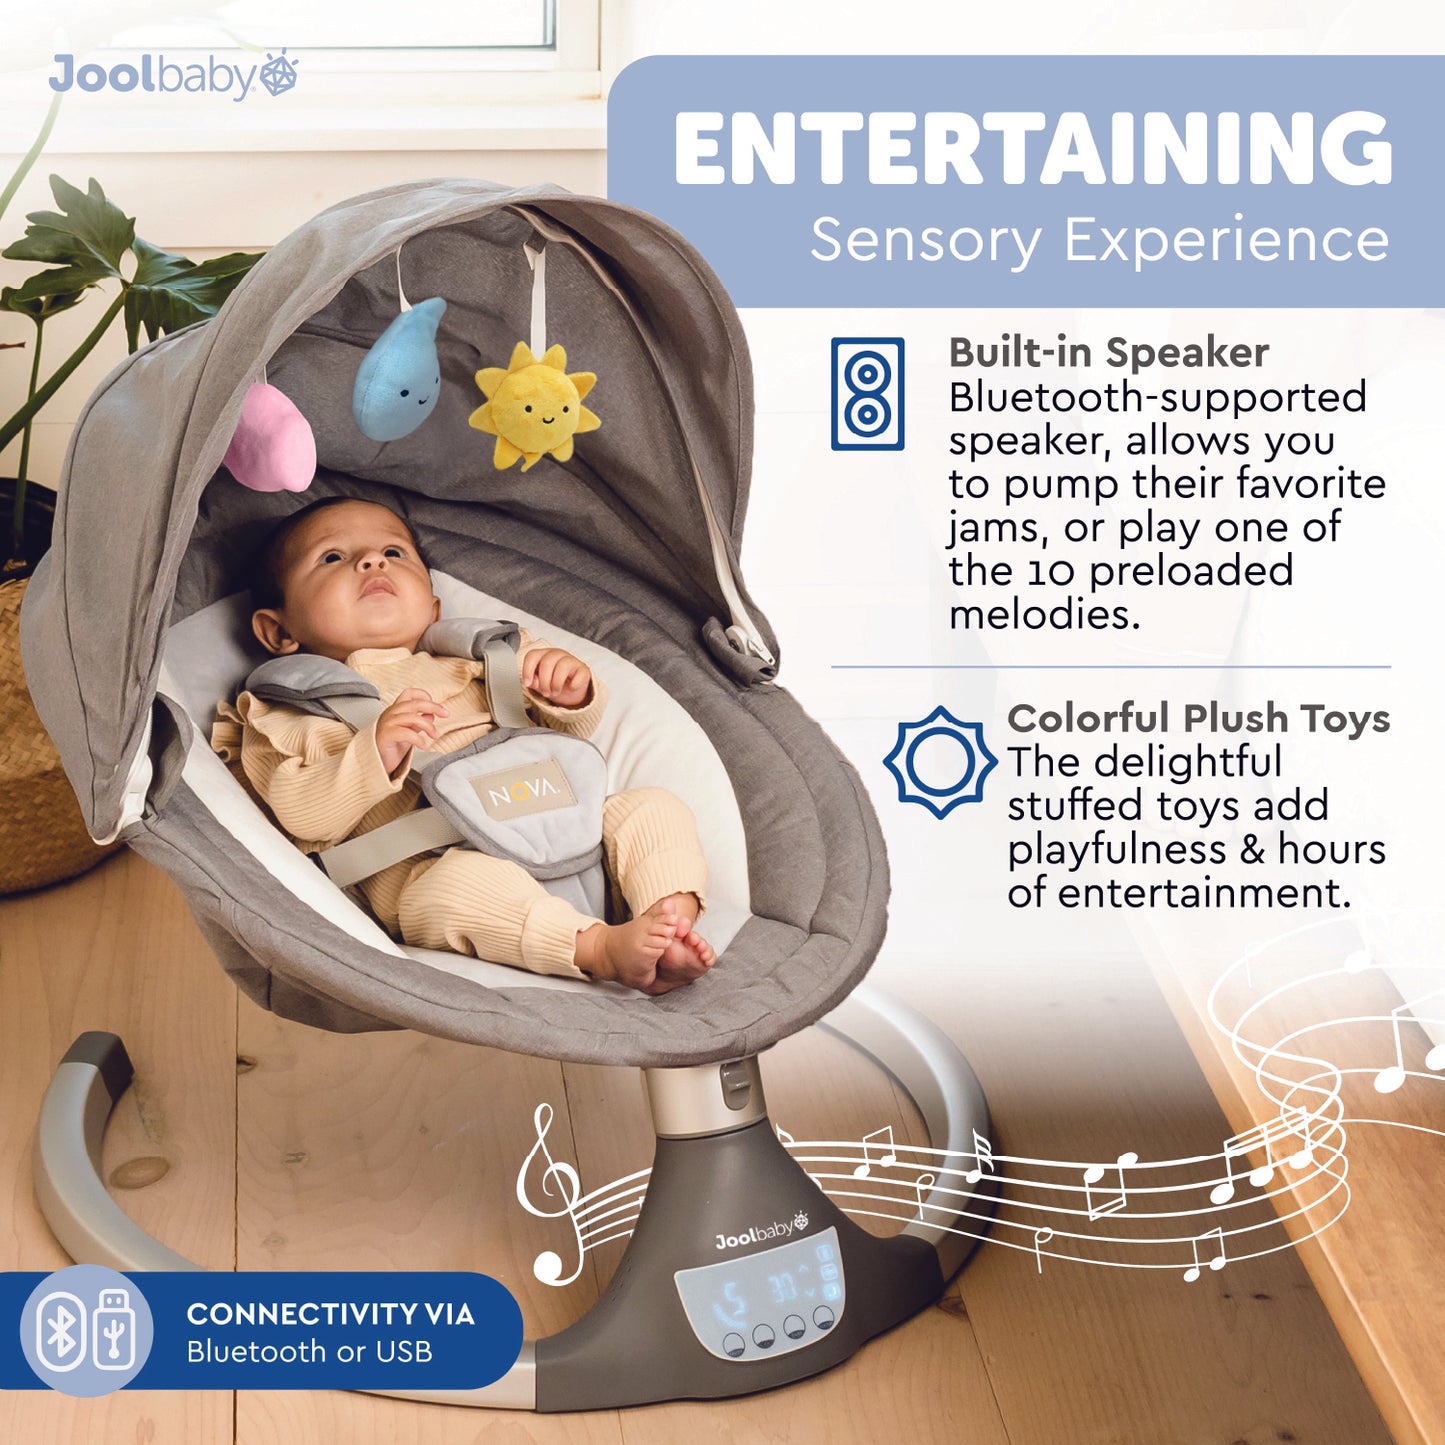 Nova Baby Swing for Infants - Motorized Swing, Bluetooth Music Speaker with 10 Preset Lullabies, Remote Control, Gray